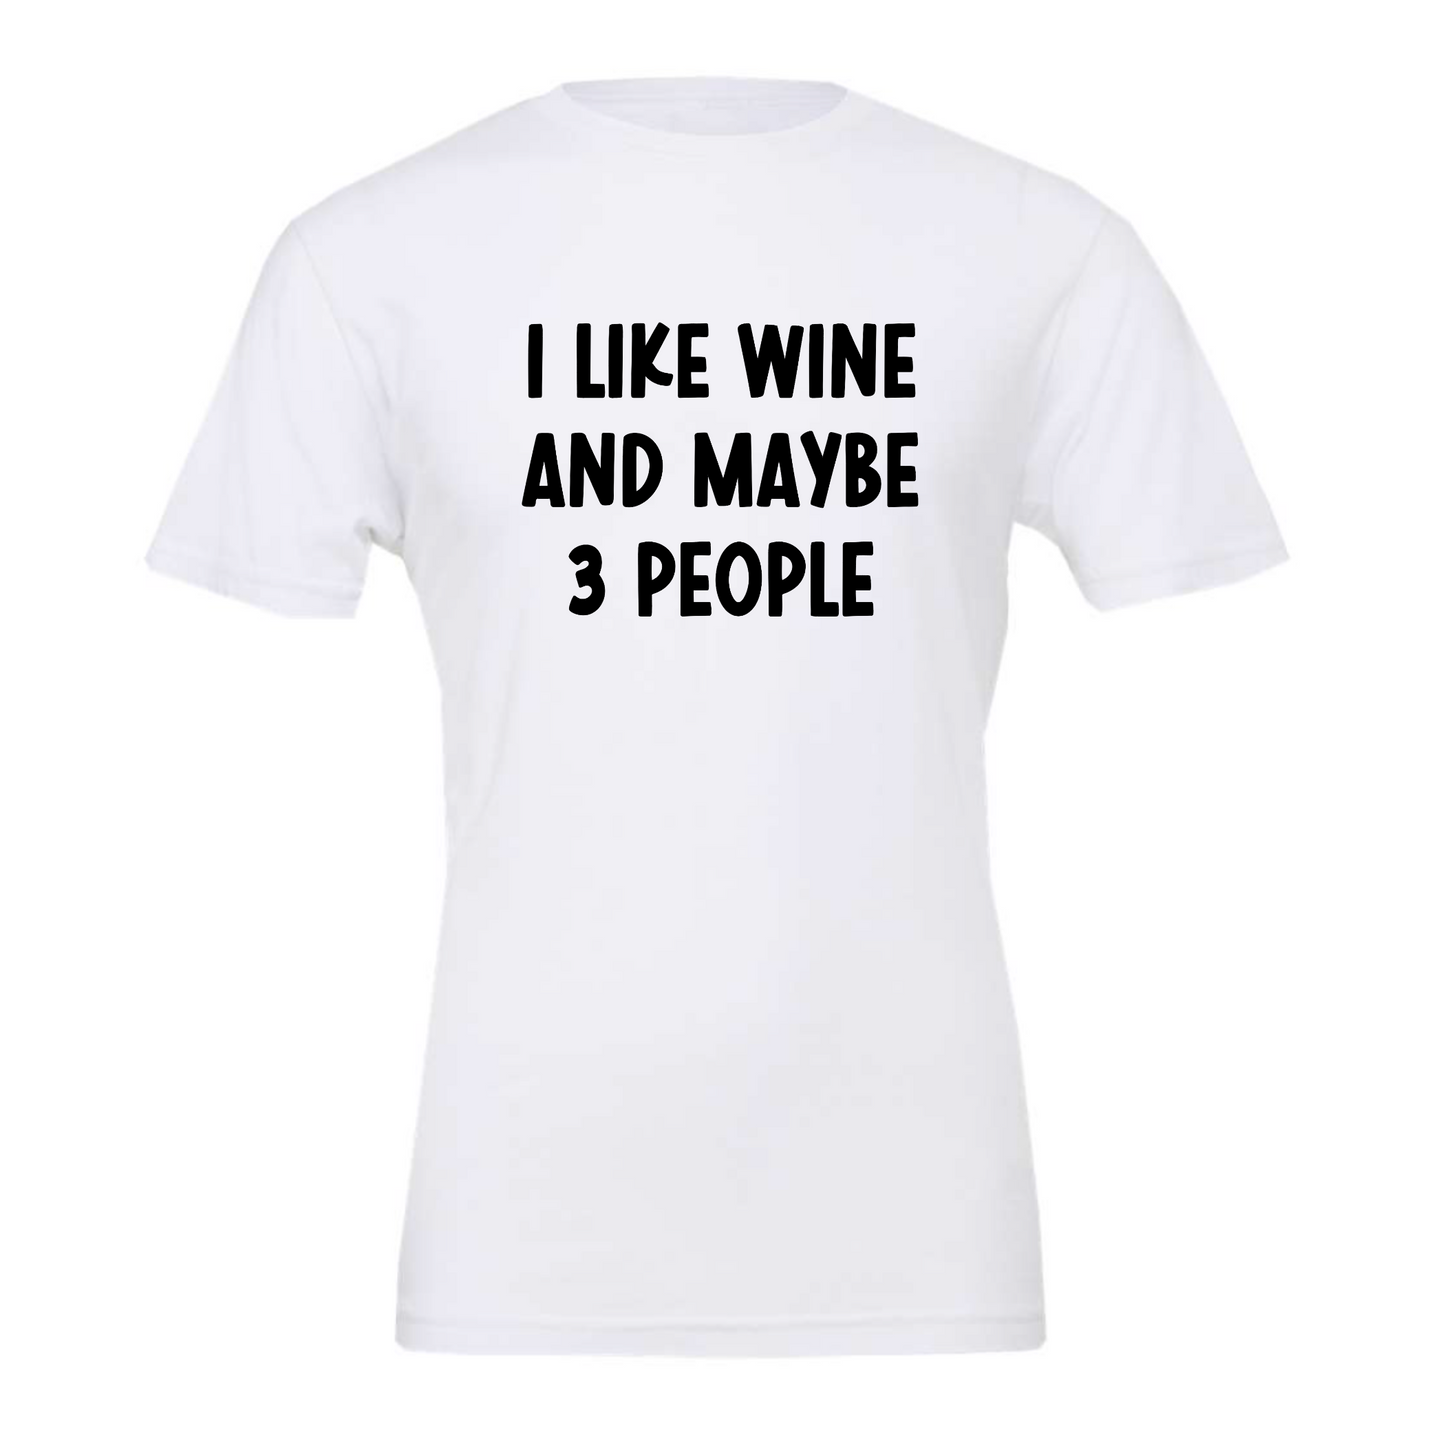 I Like Wine & Maybe 3 People - White T-Shirt in black writing. This is the front view of the t-shirt on a white background.